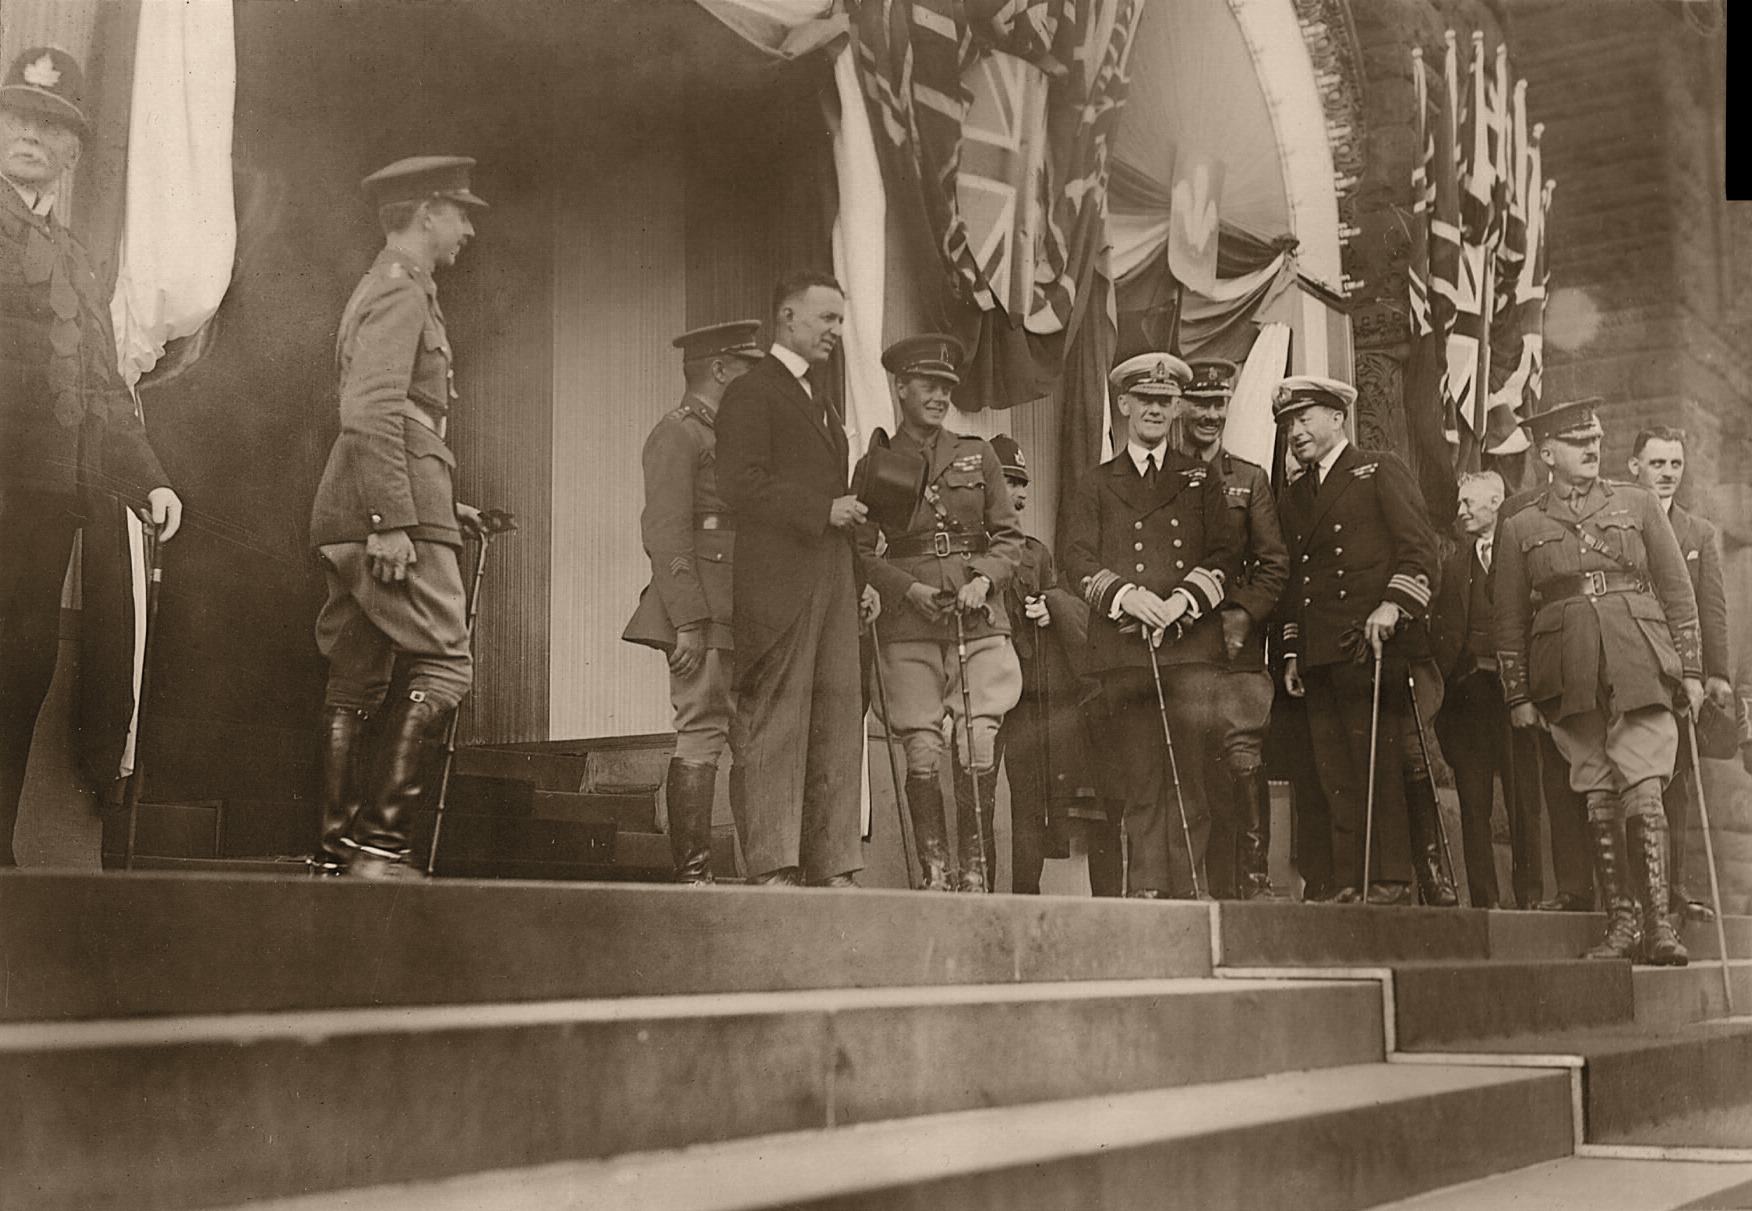 Mayor Church standing with the Prince of Wales and other dignitaries at Toronto's City Hall, 1919.